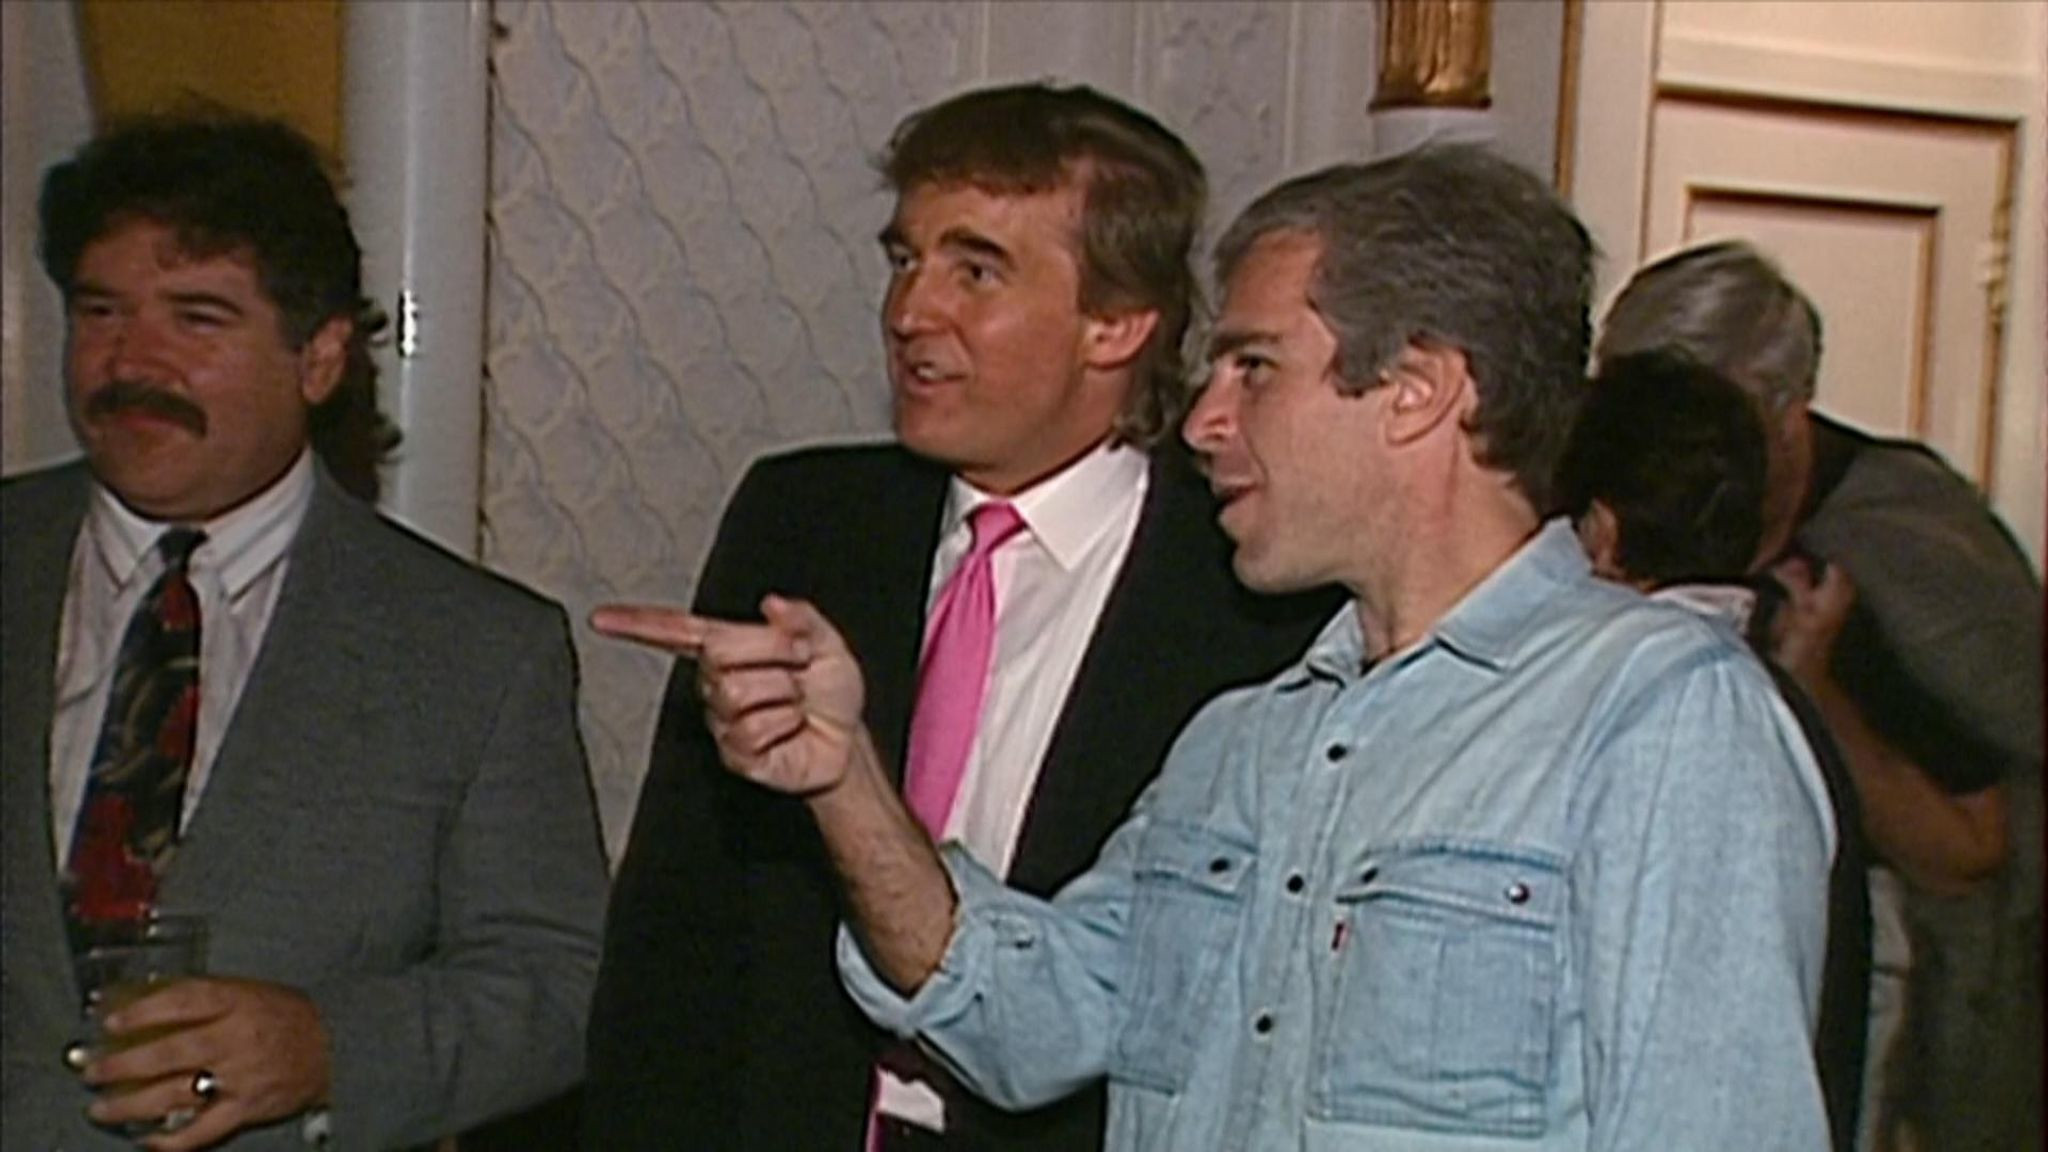 Jeffrey Epstein and Donald Trump: A timeline of their relationship